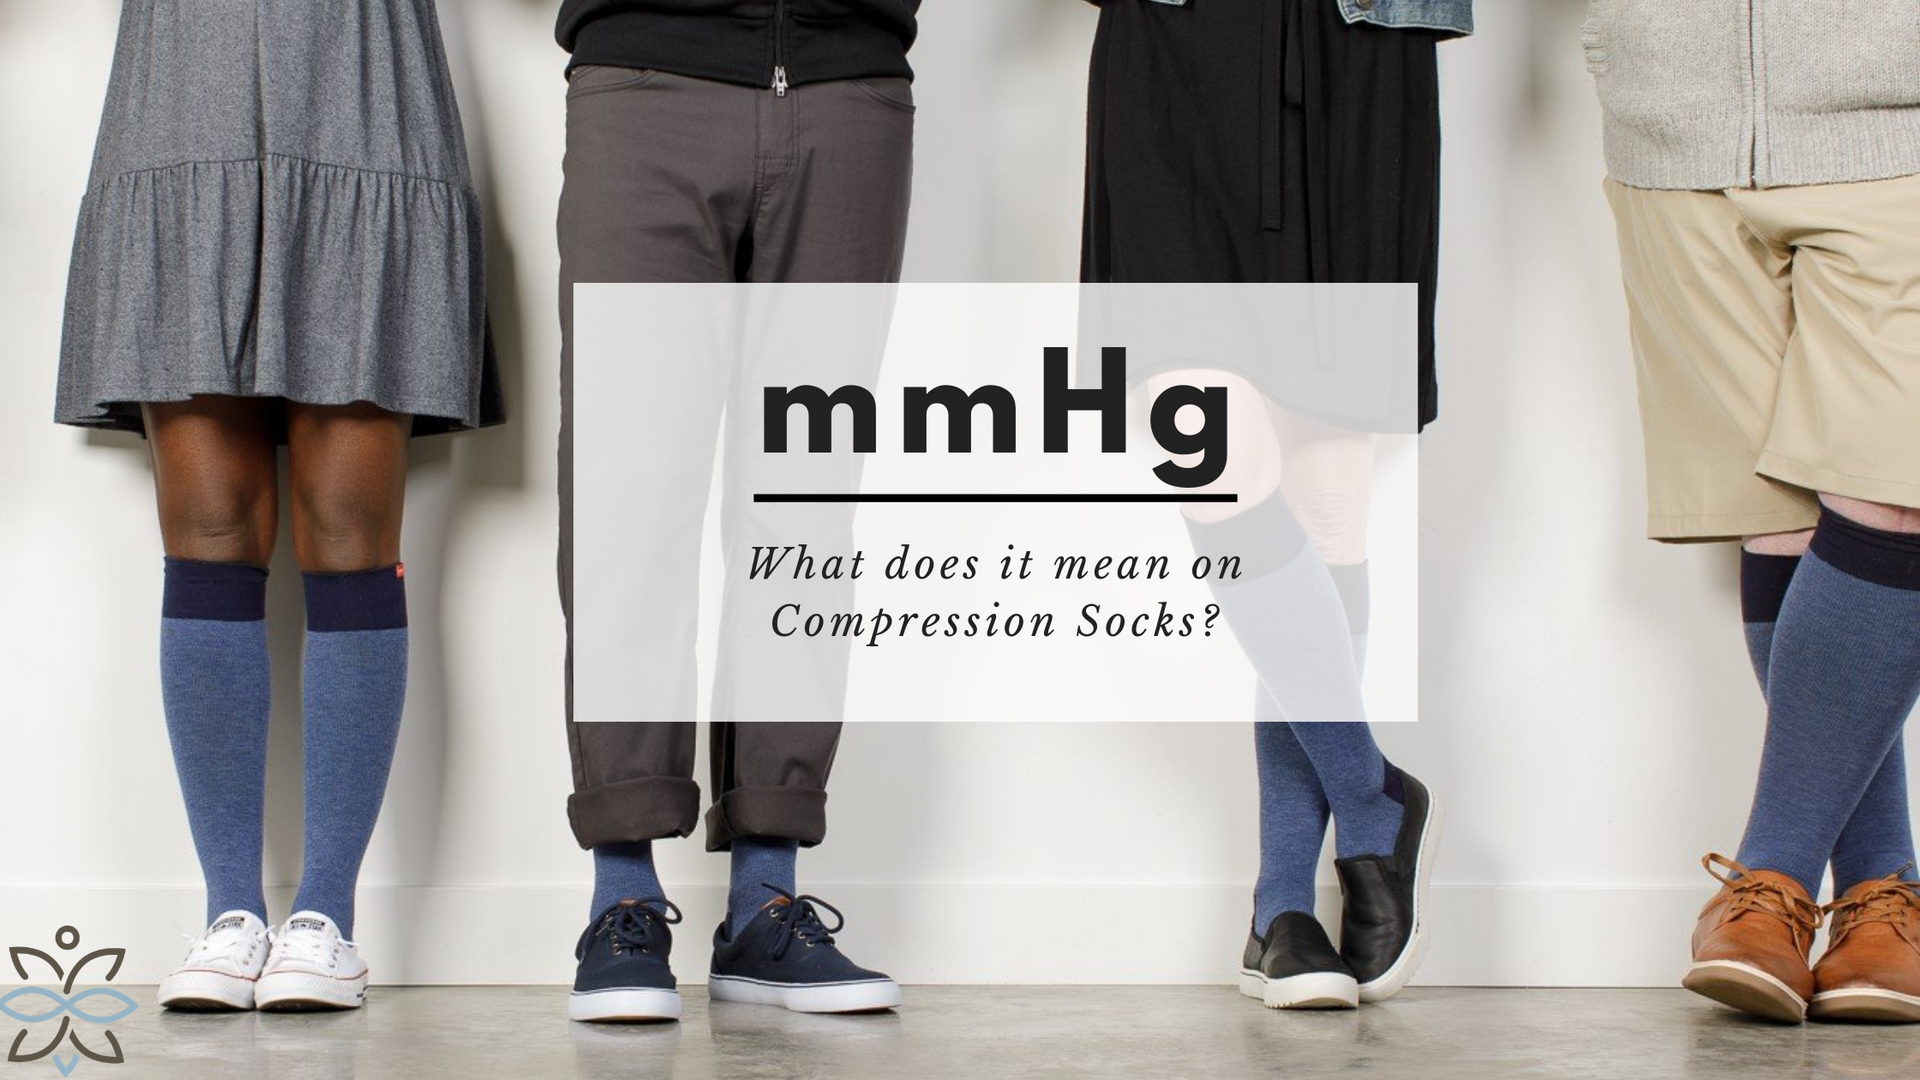 What Does mmHg Mean on Compression Socks?